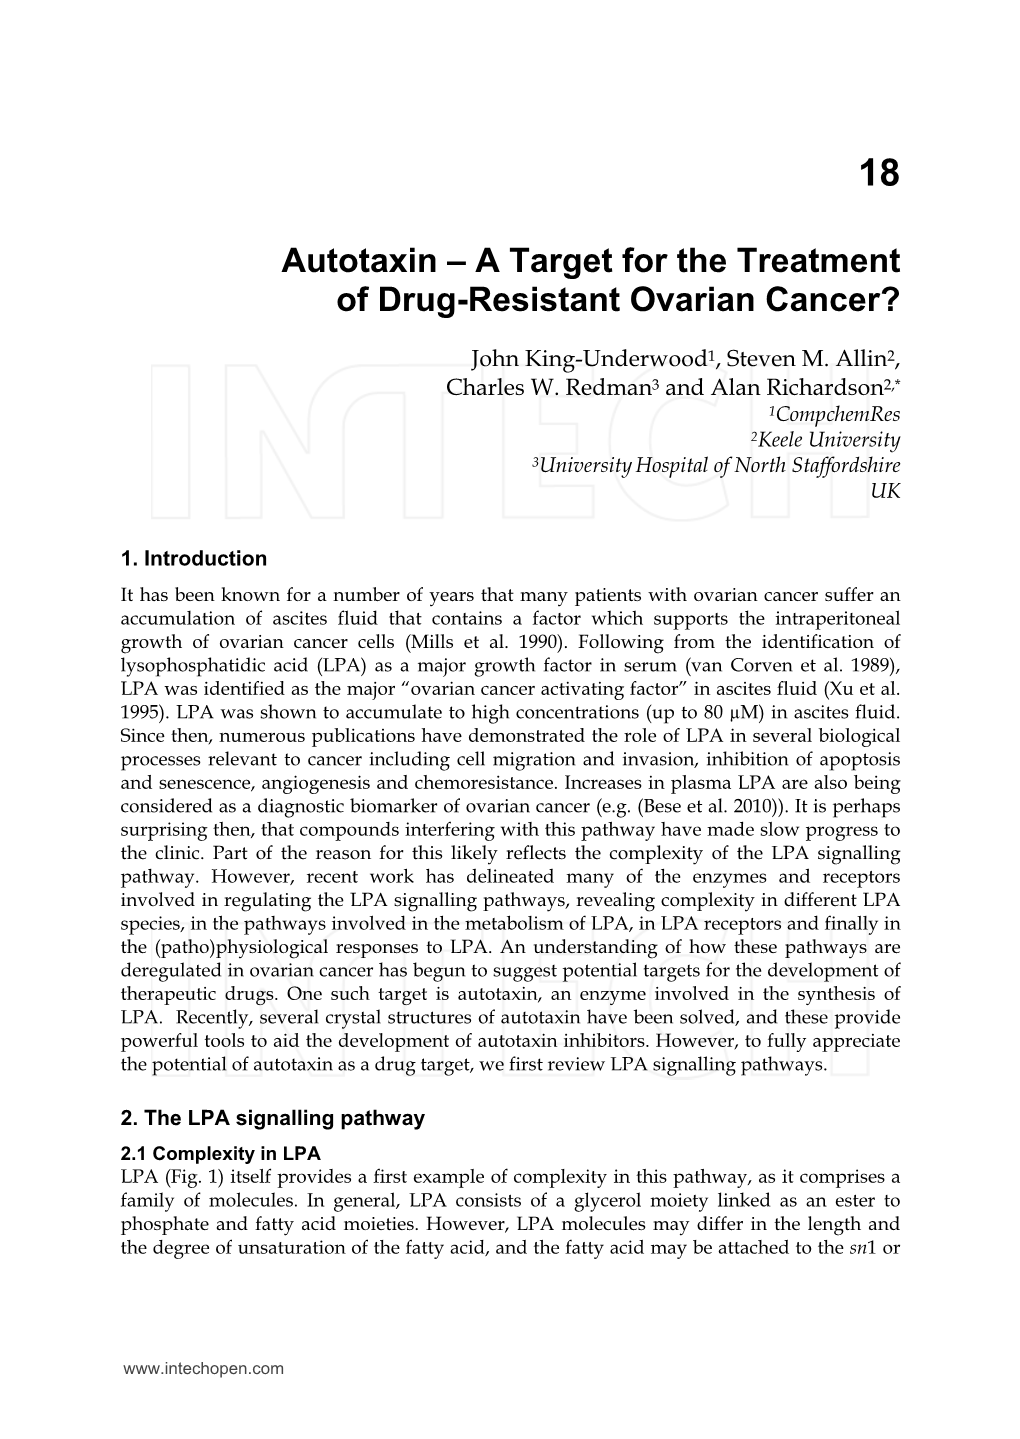 Autotaxin – a Target for the Treatment of Drug-Resistant Ovarian Cancer?